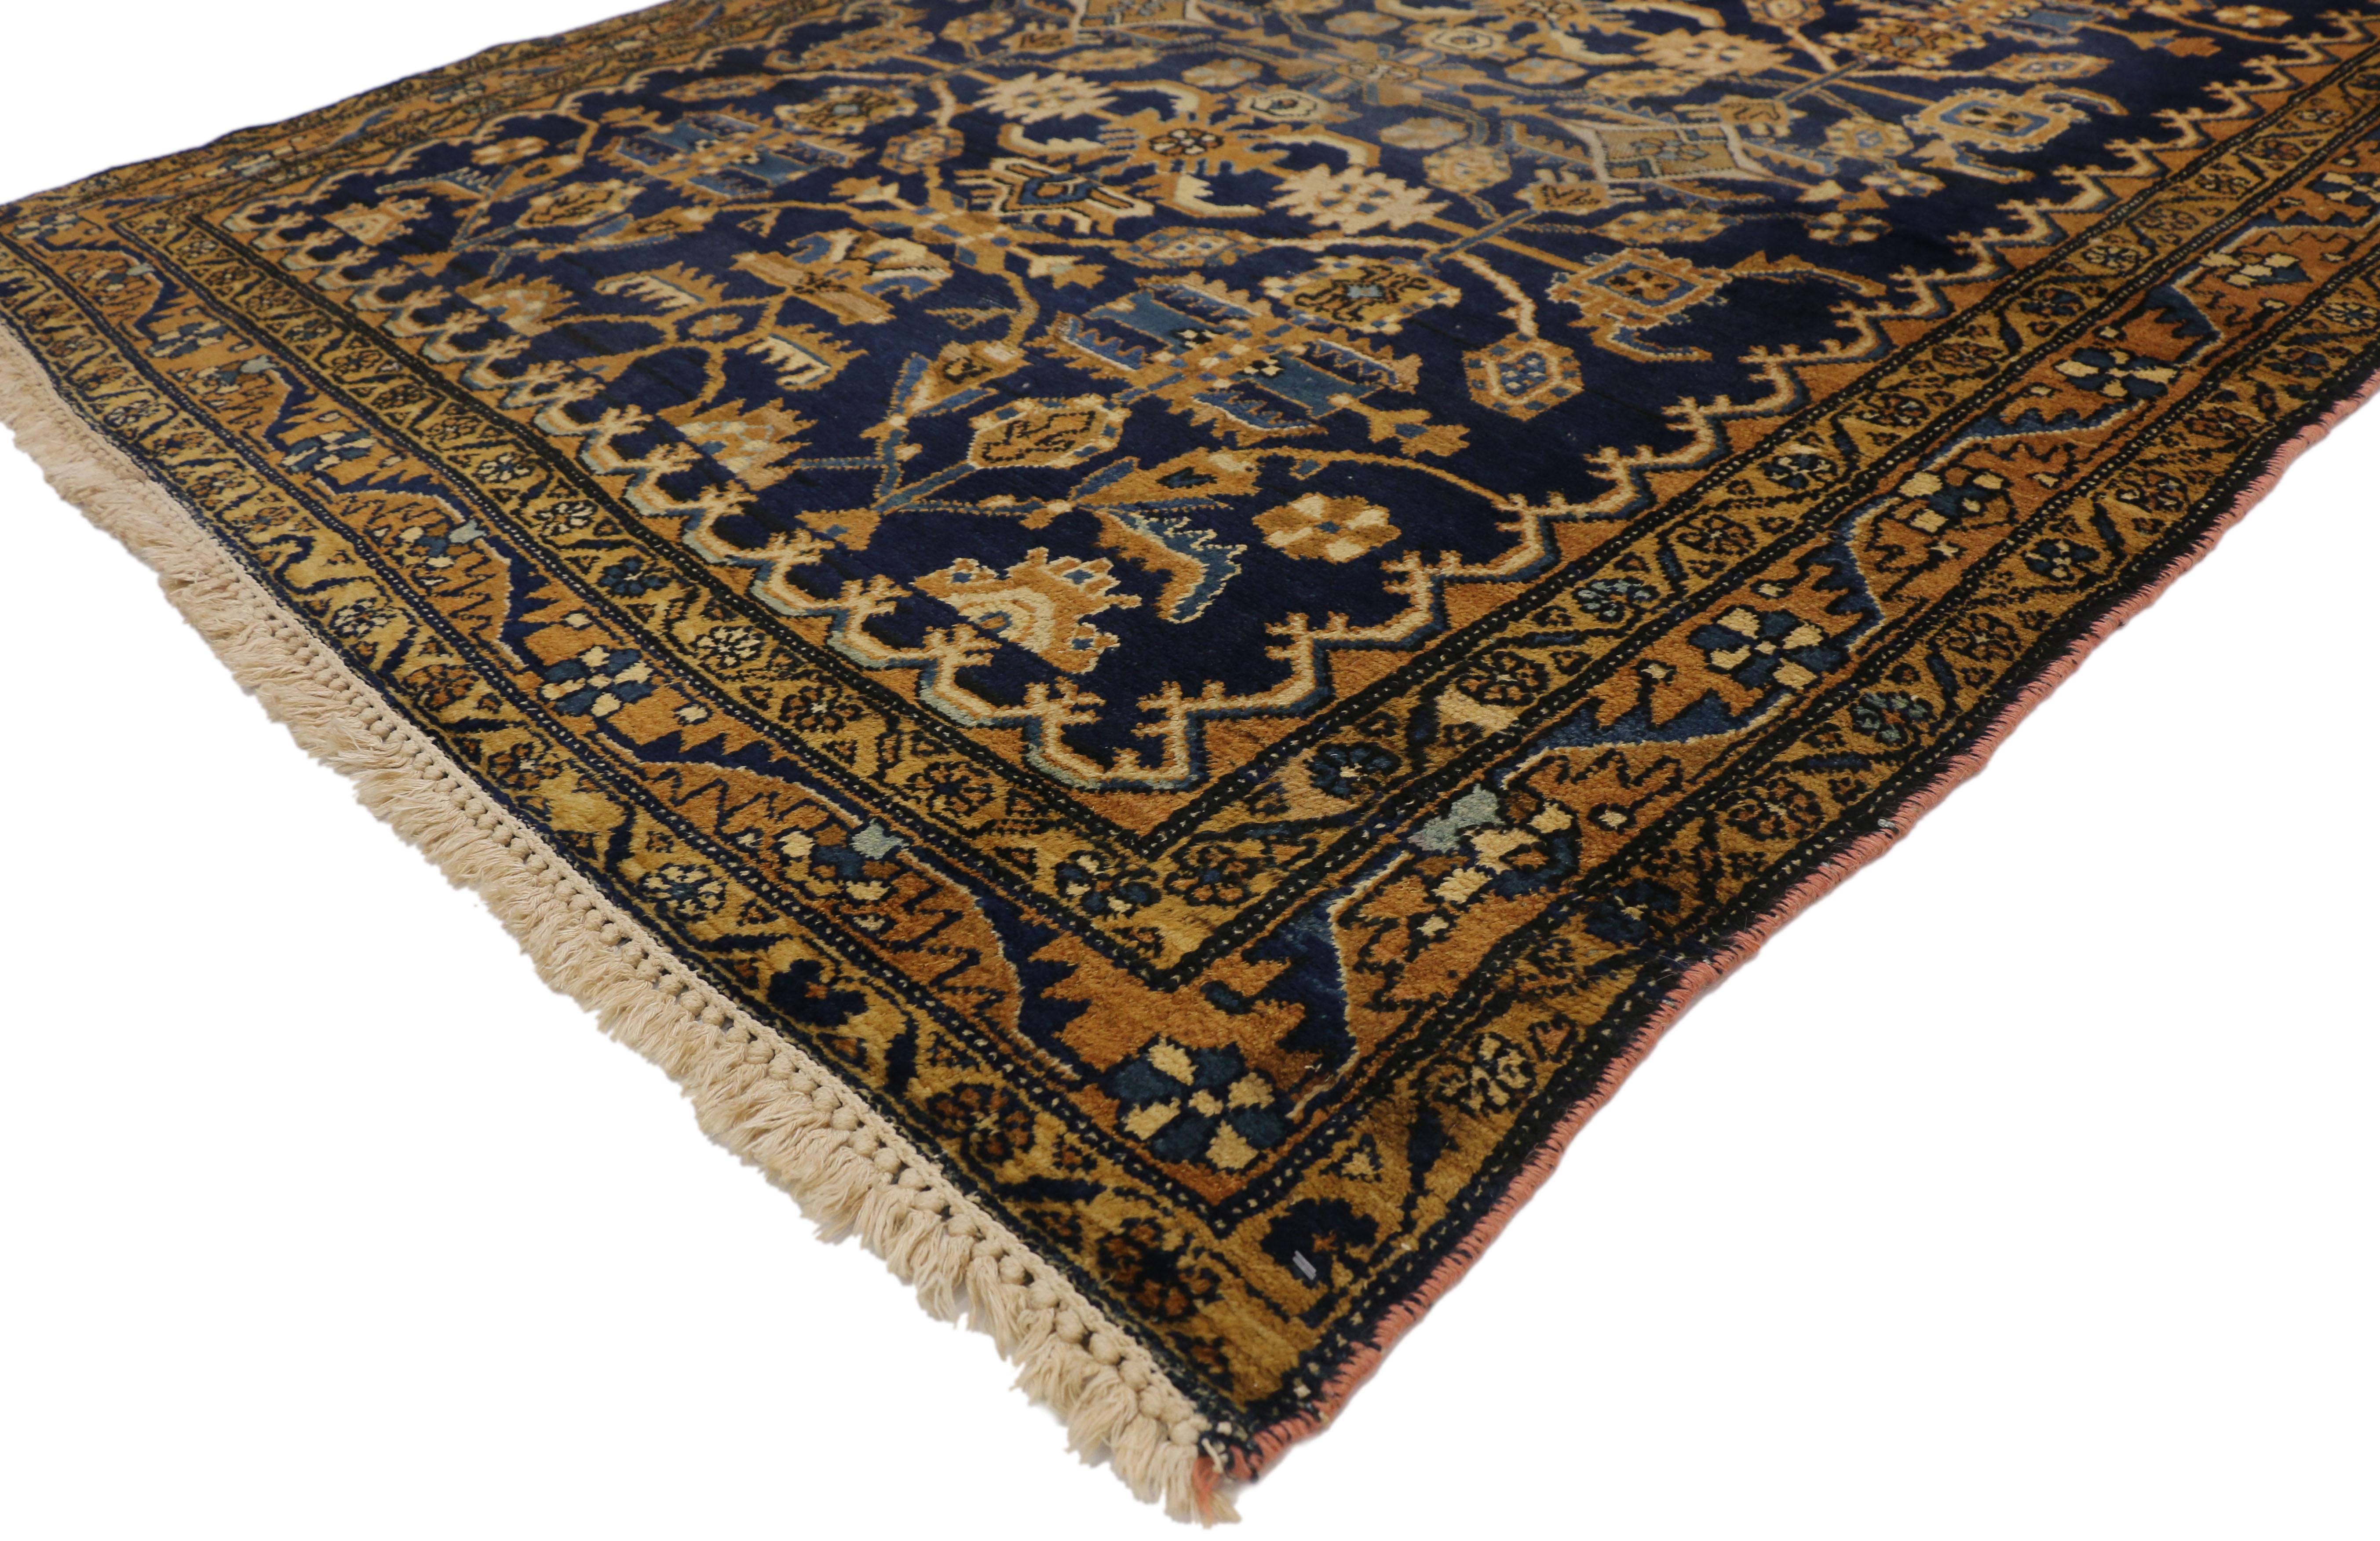 75775, vintage Persian Hamadan rug with Hollywood Regency style. This hand-knotted wool vintage Persian Hamadan rug features an all-over botanical pattern in a Hollywood Regency style. Brass and camel stems and tendrils blossom into flowers